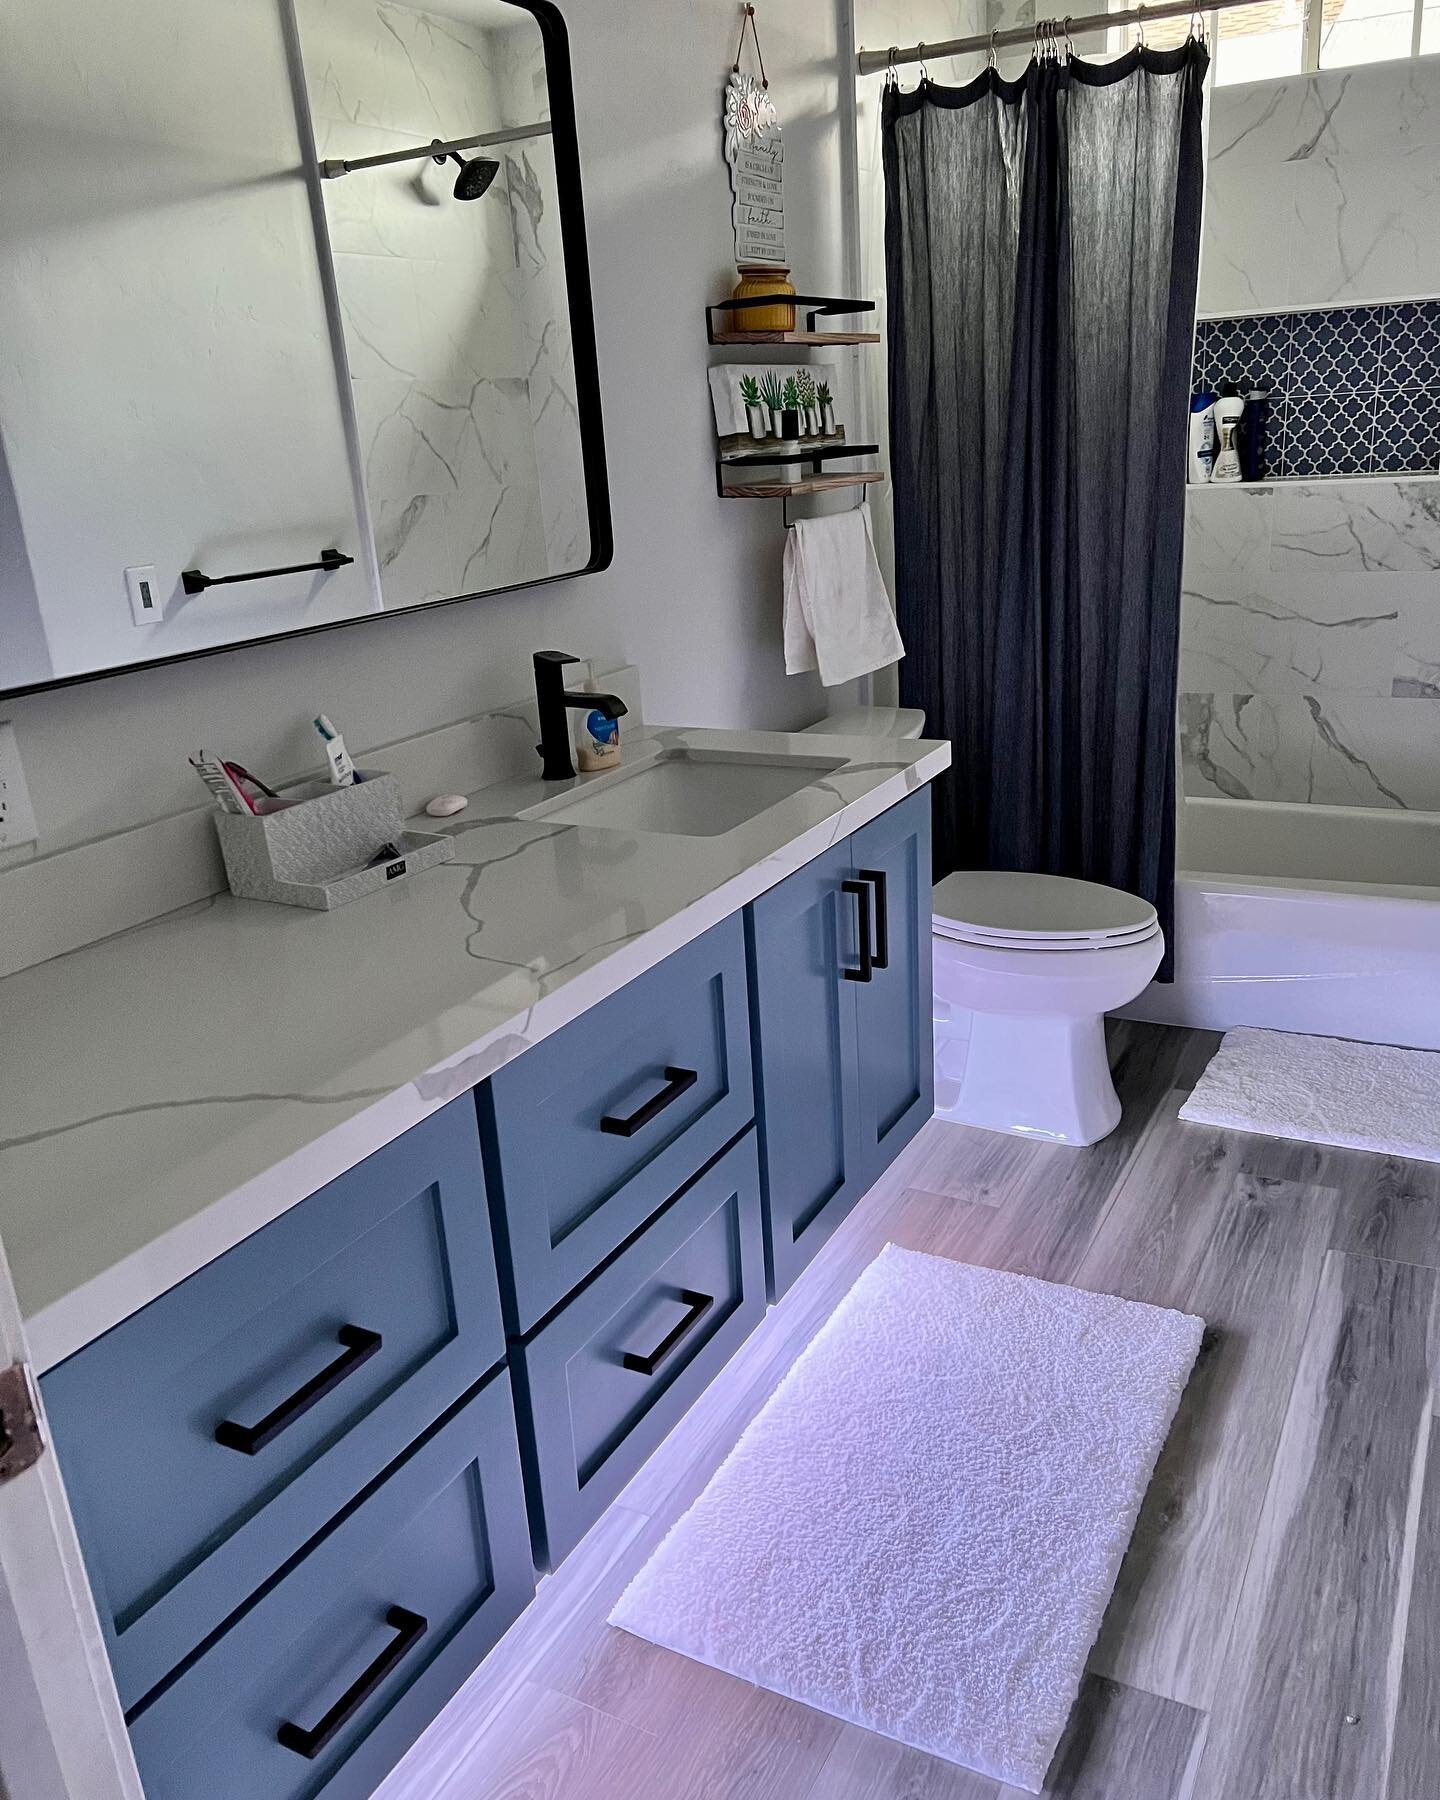 bathroom remodel with an extra touch of LED lights 💡

Call or Text Jojo (831-265-9696) for a free estimate! 
&bull;
&bull;
&bull;
#bathroomdesign #bathroomremodelingideas #bathroomremodel #bathroom #generalcontractor #hollister #veteran #veteranowne